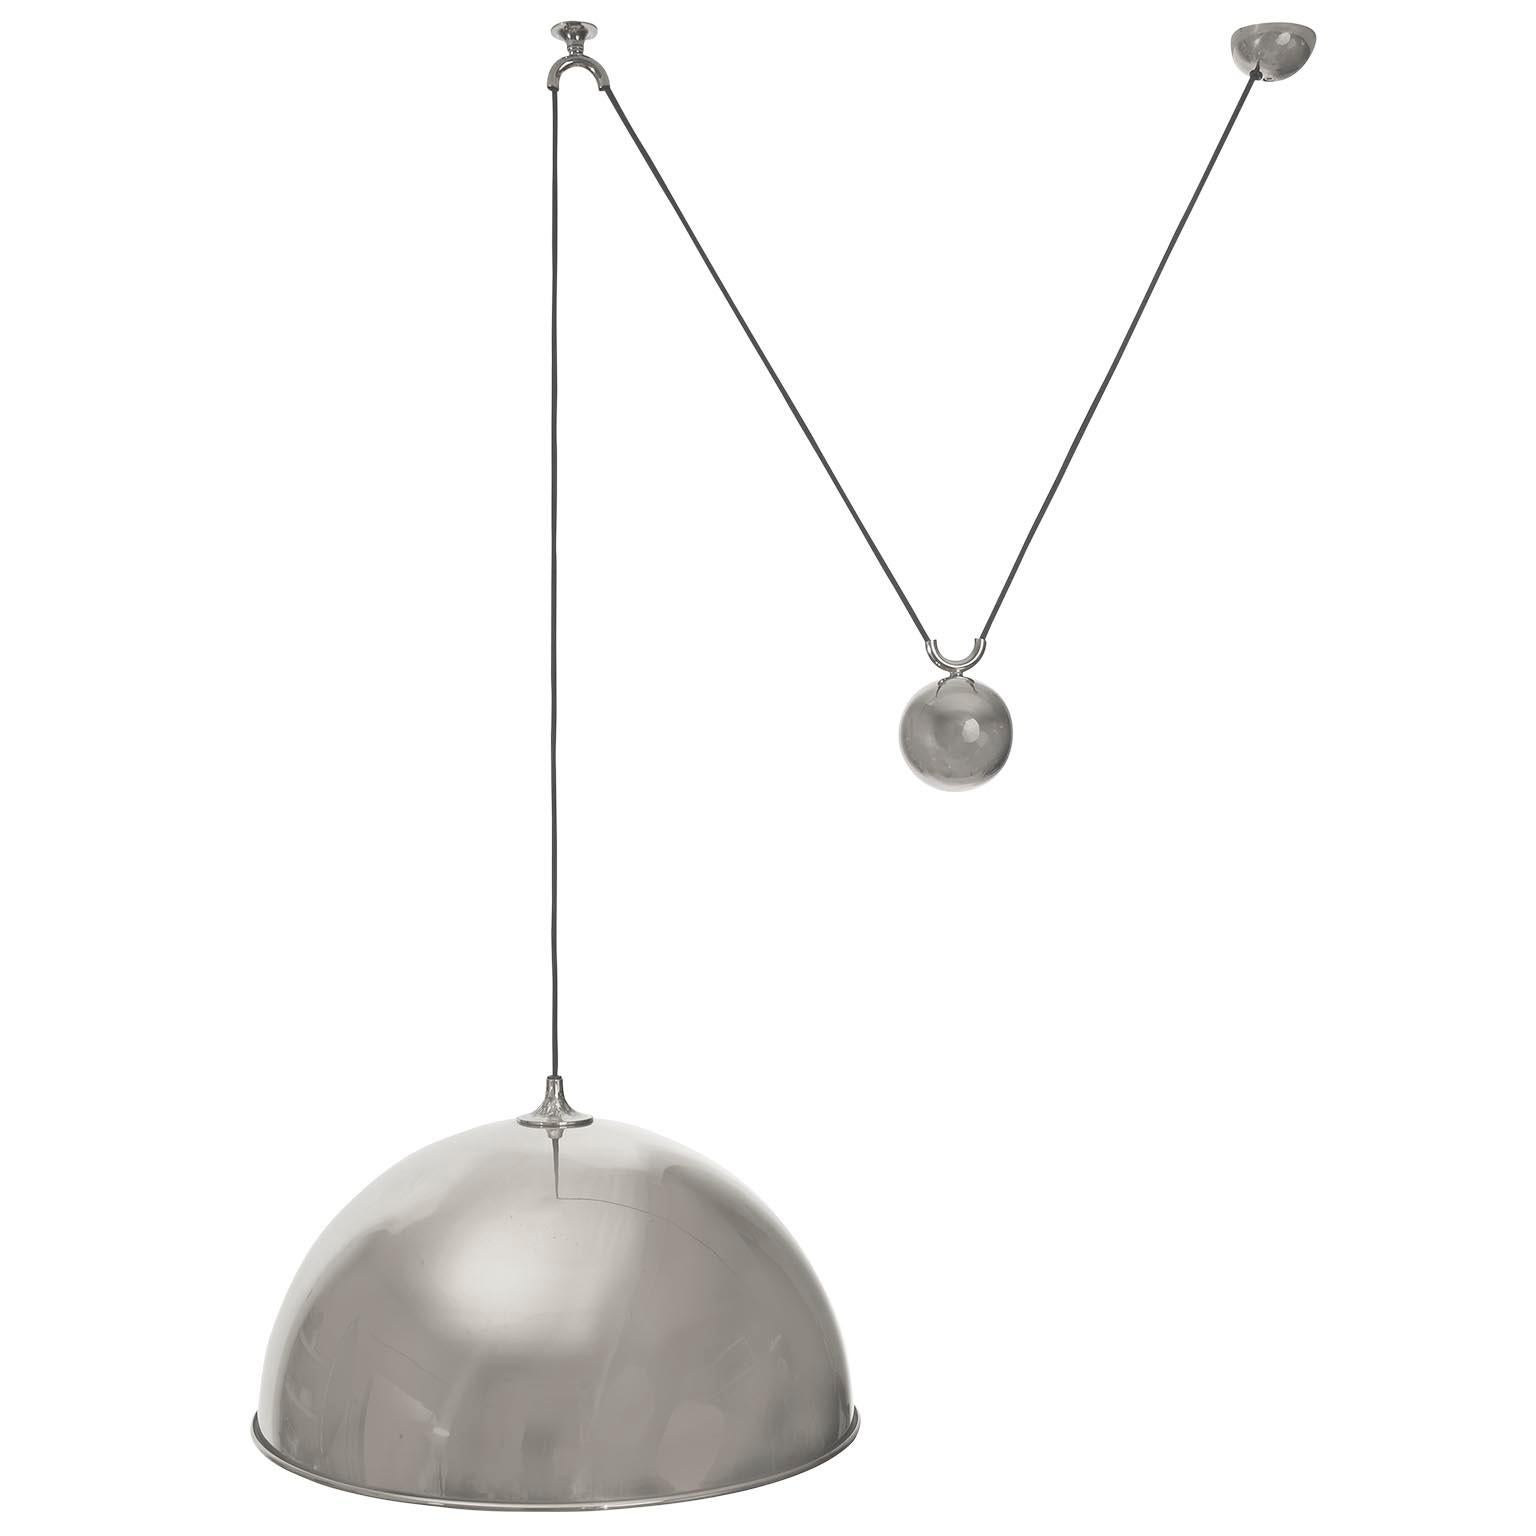 A height adjustable counter weight pendant lamp by Florian Schulz, Germany, manufactured in midcentury, circa 1970 (late 1960s-early 1970s).
The fixture is made of nickel plated solid brass. The naturally aged nickel has got patina and become matte